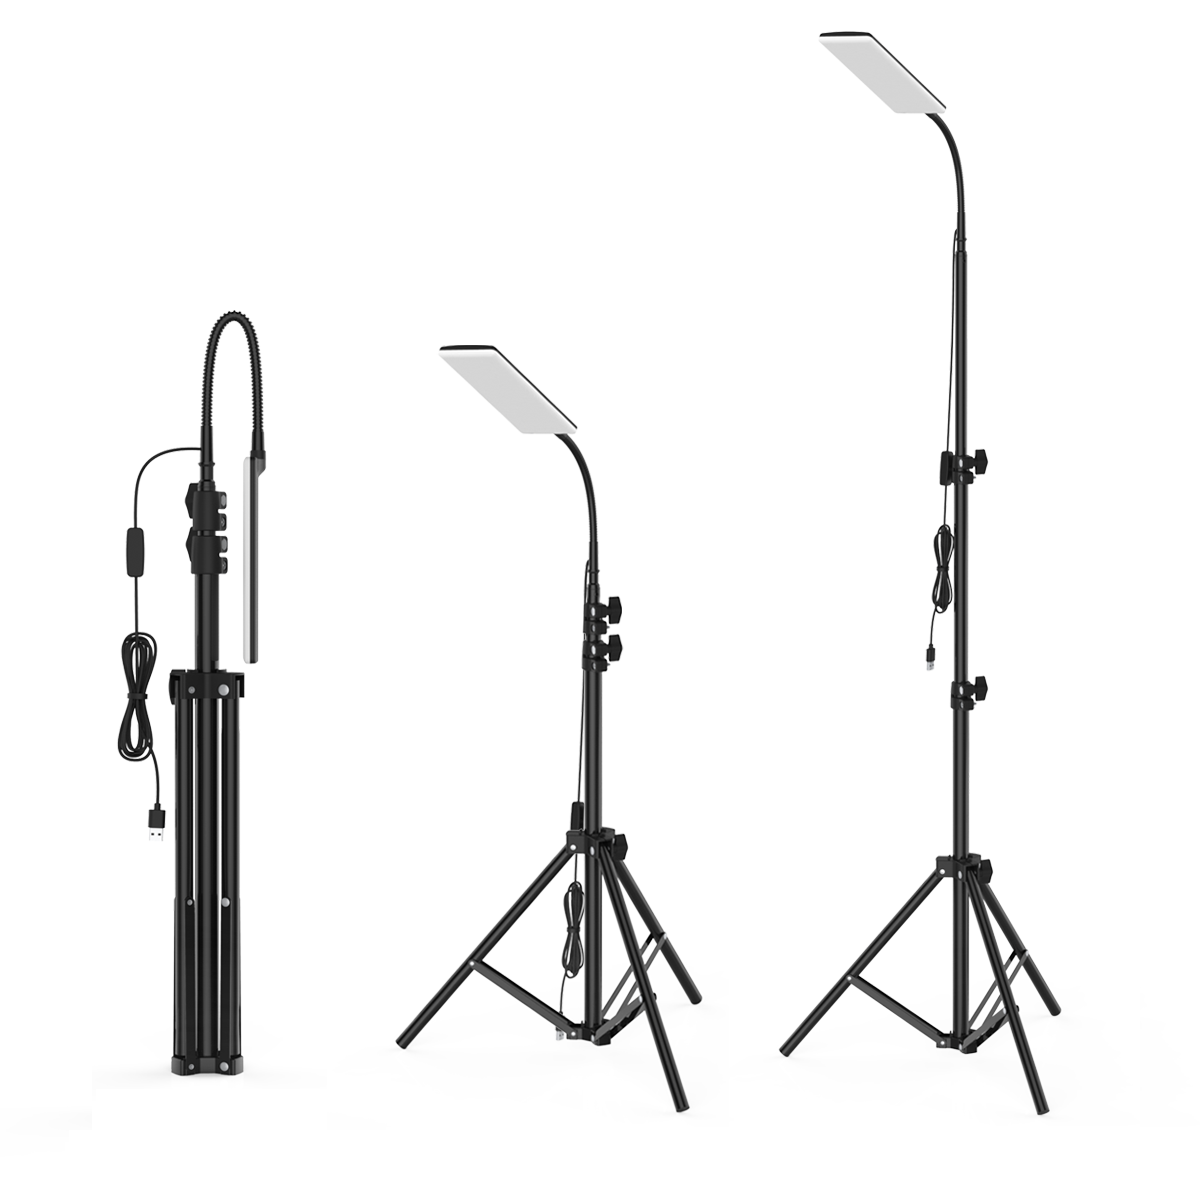 Upgraded Head 84*LED 1.8m Adjustable Tripod Stand Light Portable Outdoor LED Work Lamp Photography F